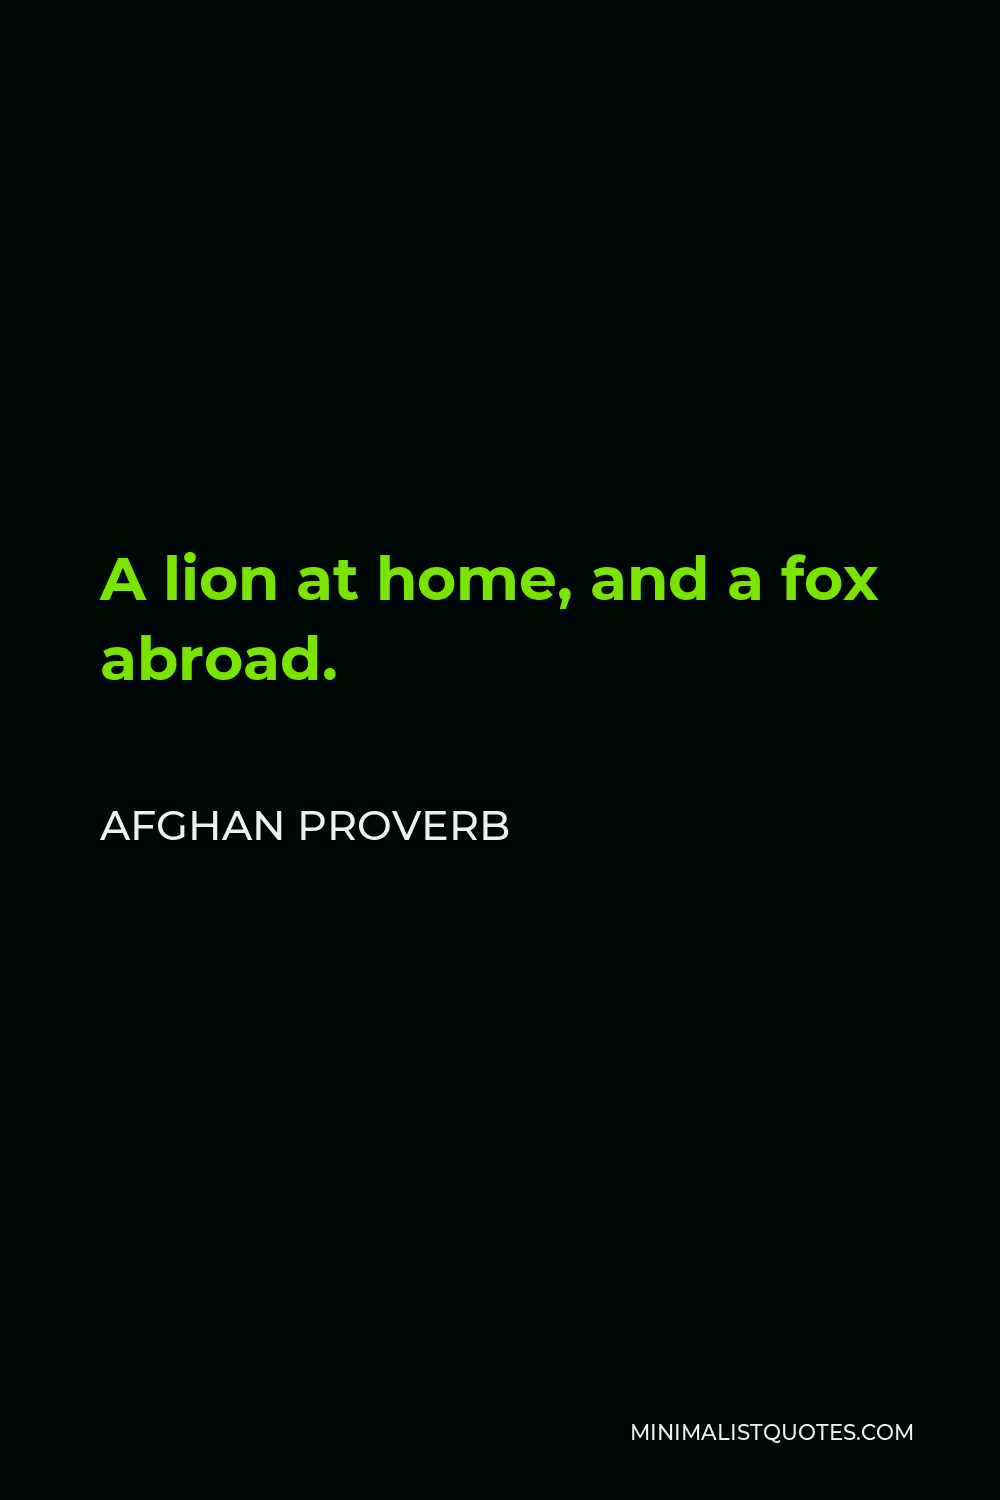 Afghan Proverb Quote - A lion at home, and a fox abroad.